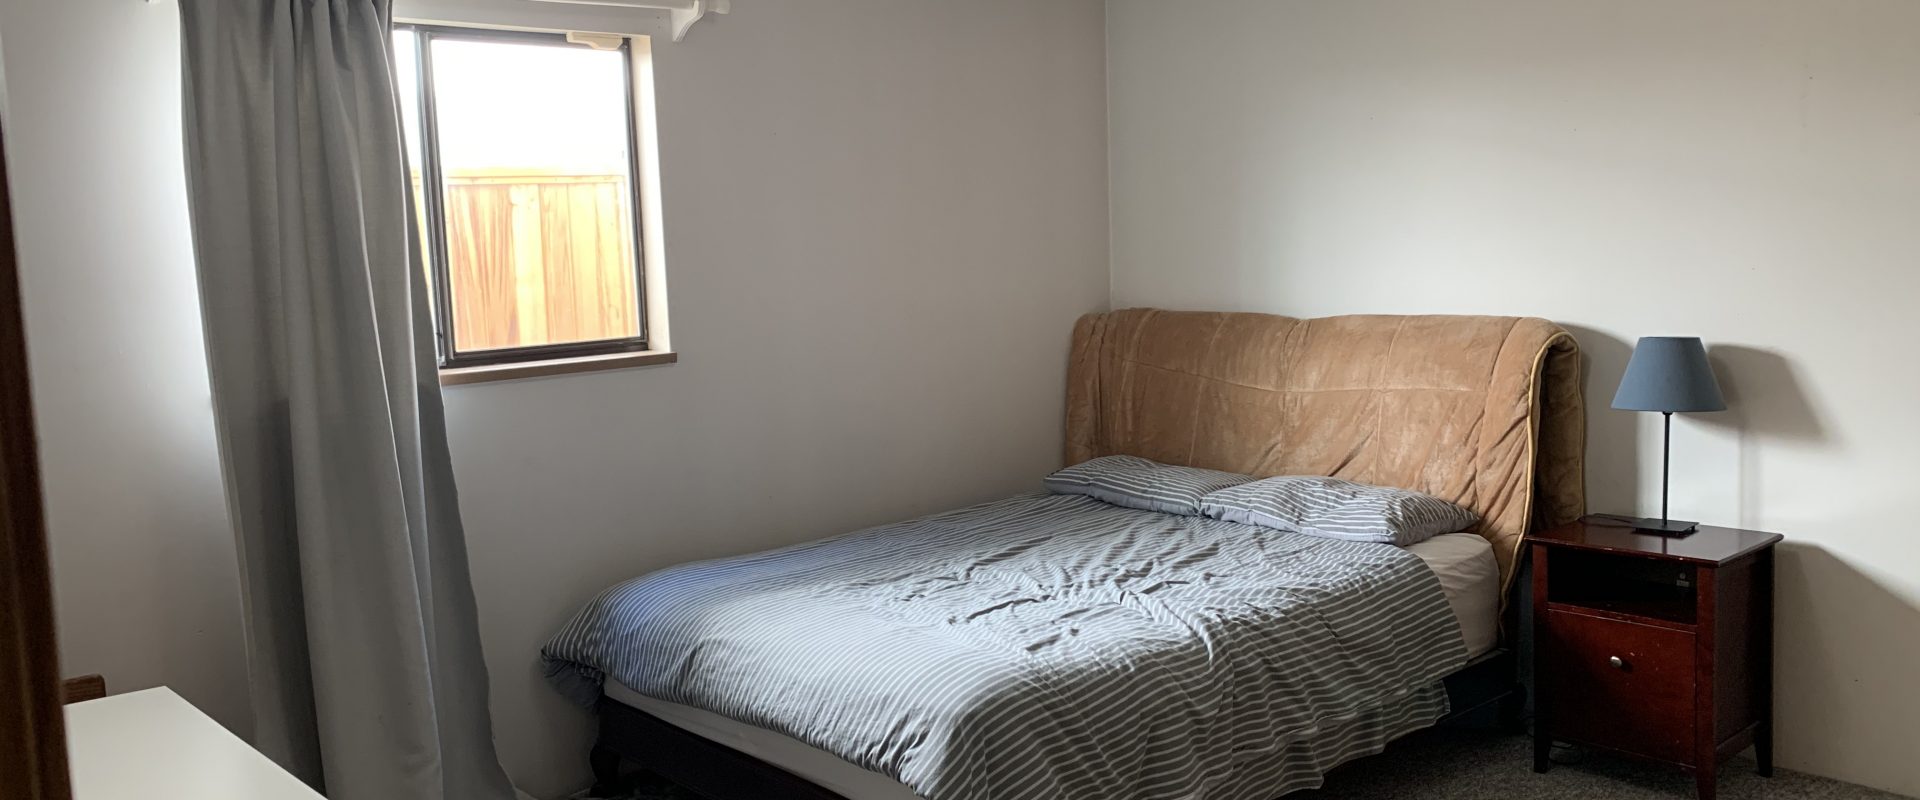 Prime West of Dunbar Location, House Ground Level Suite, 5 mins to UBC